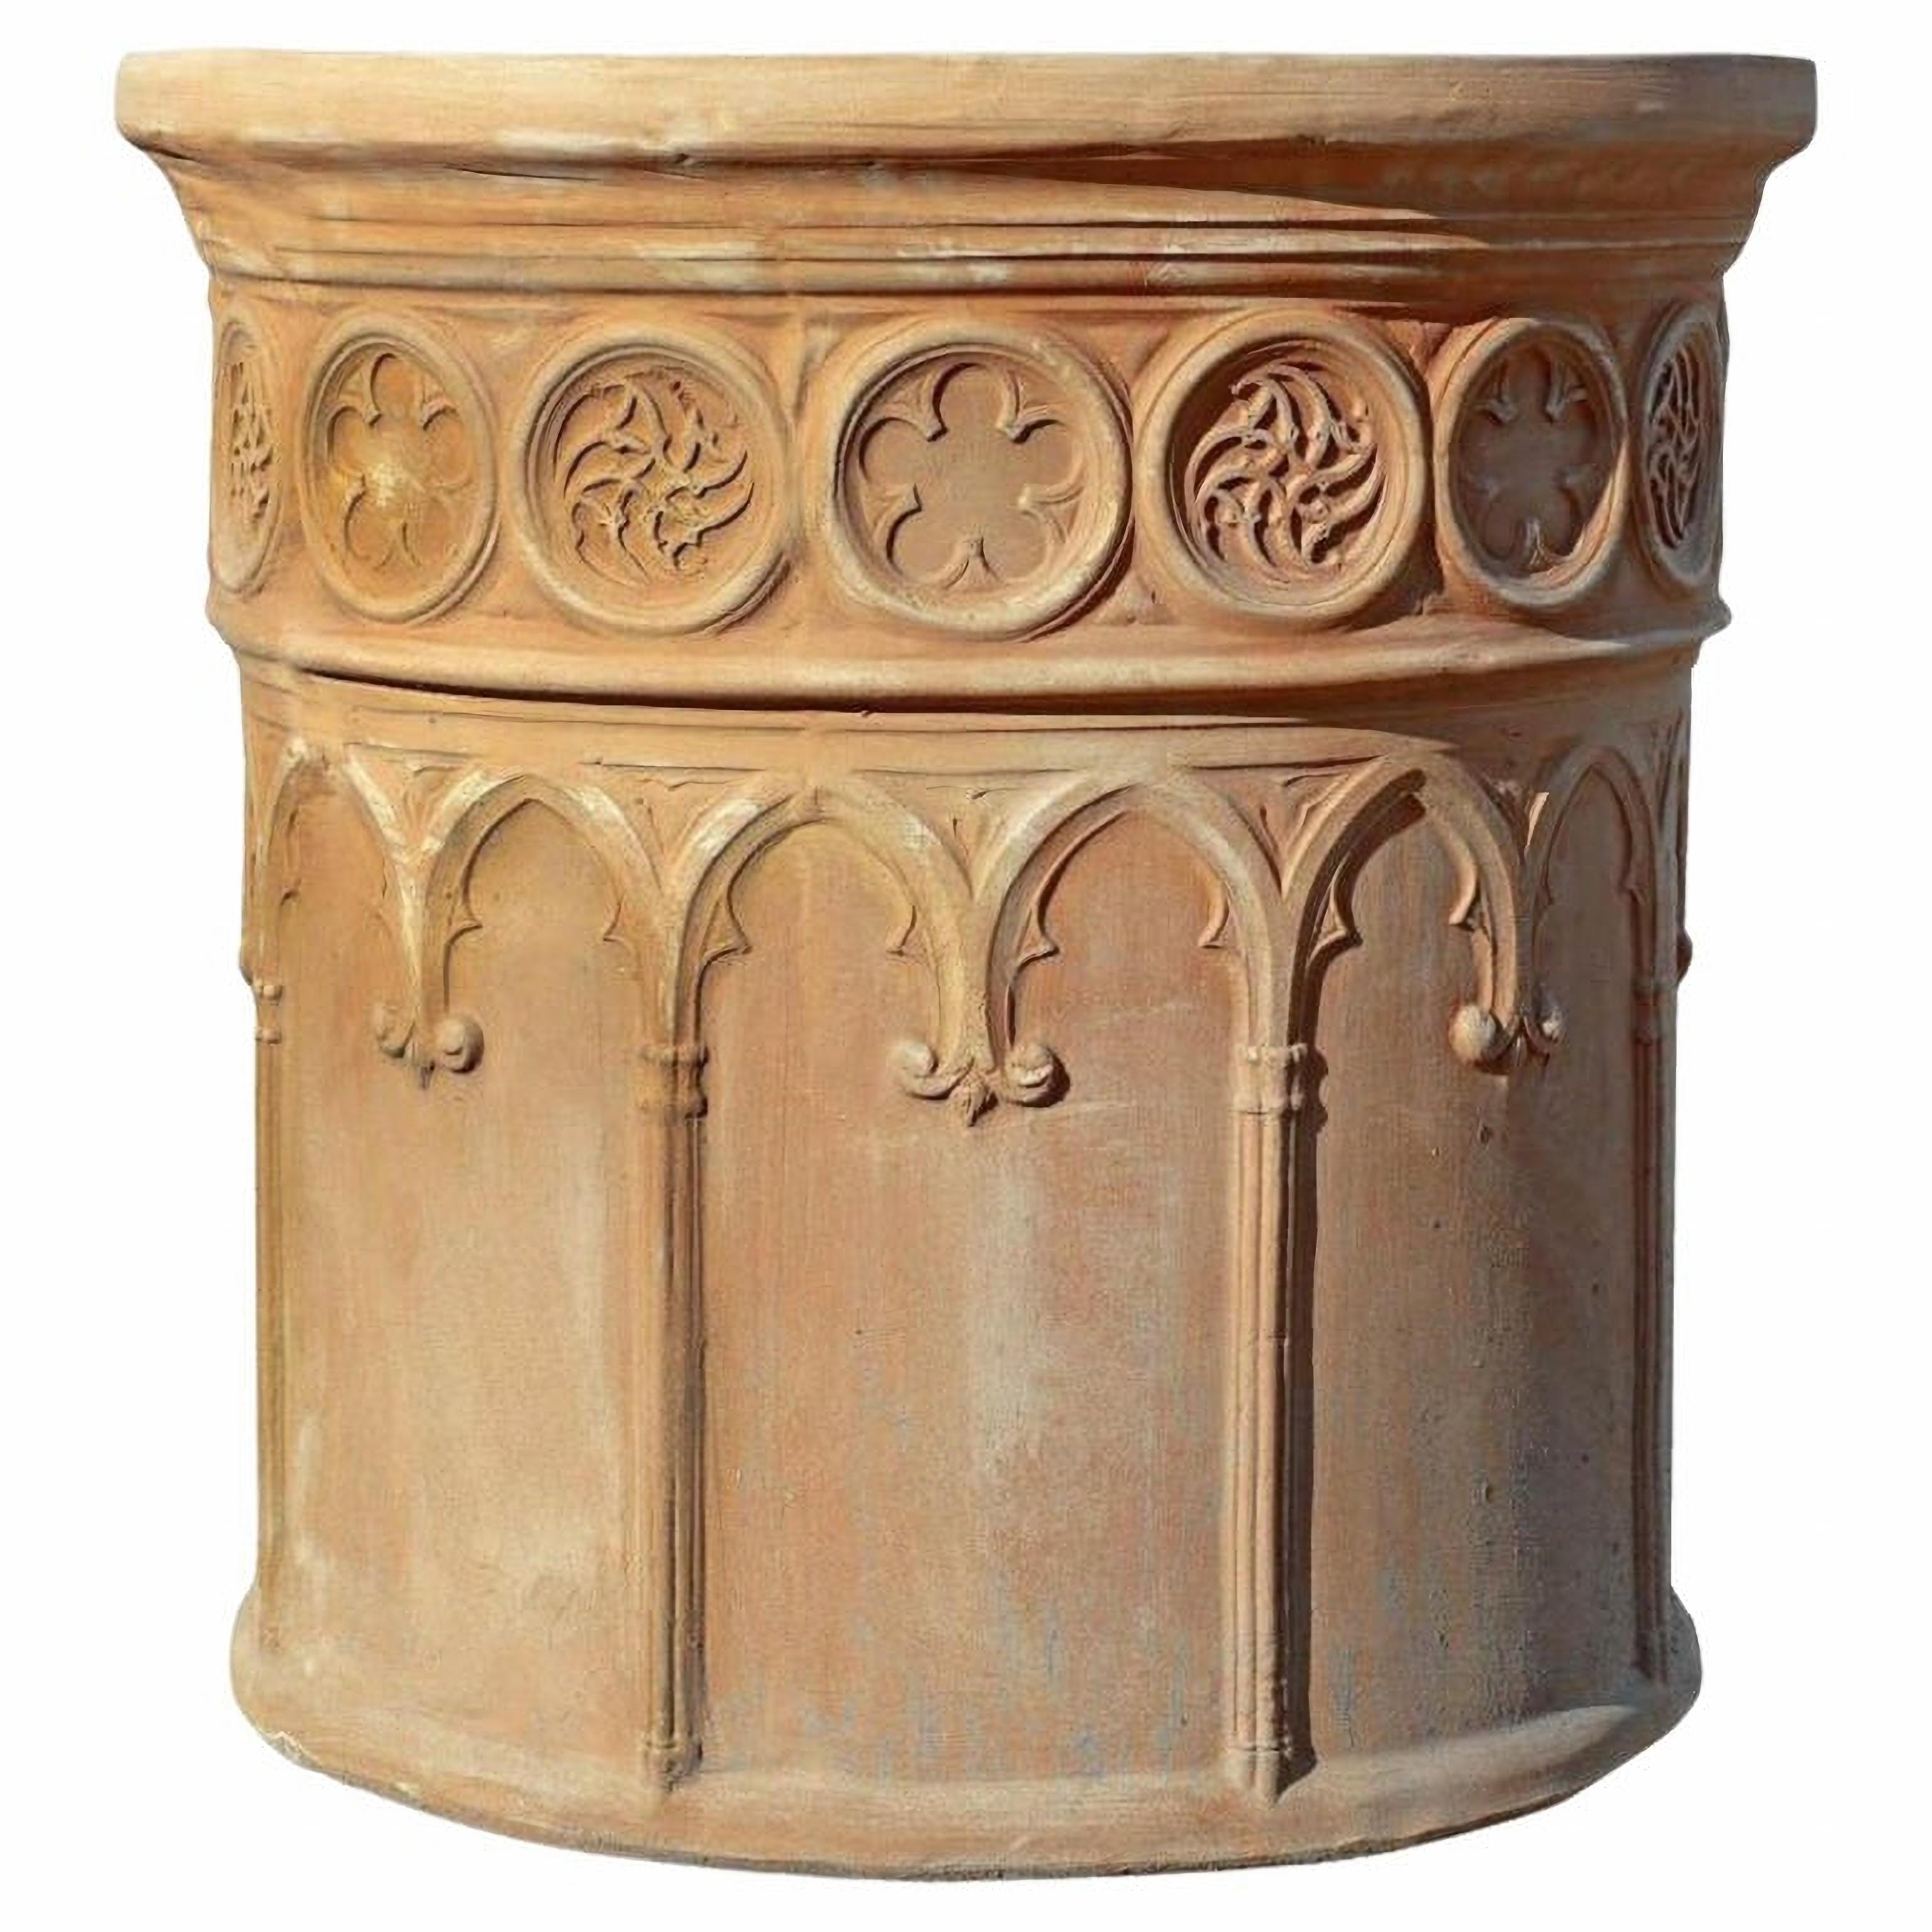 Hand-Crafted Corinthian Vase, Tuscan Terracotta, 20th Century For Sale